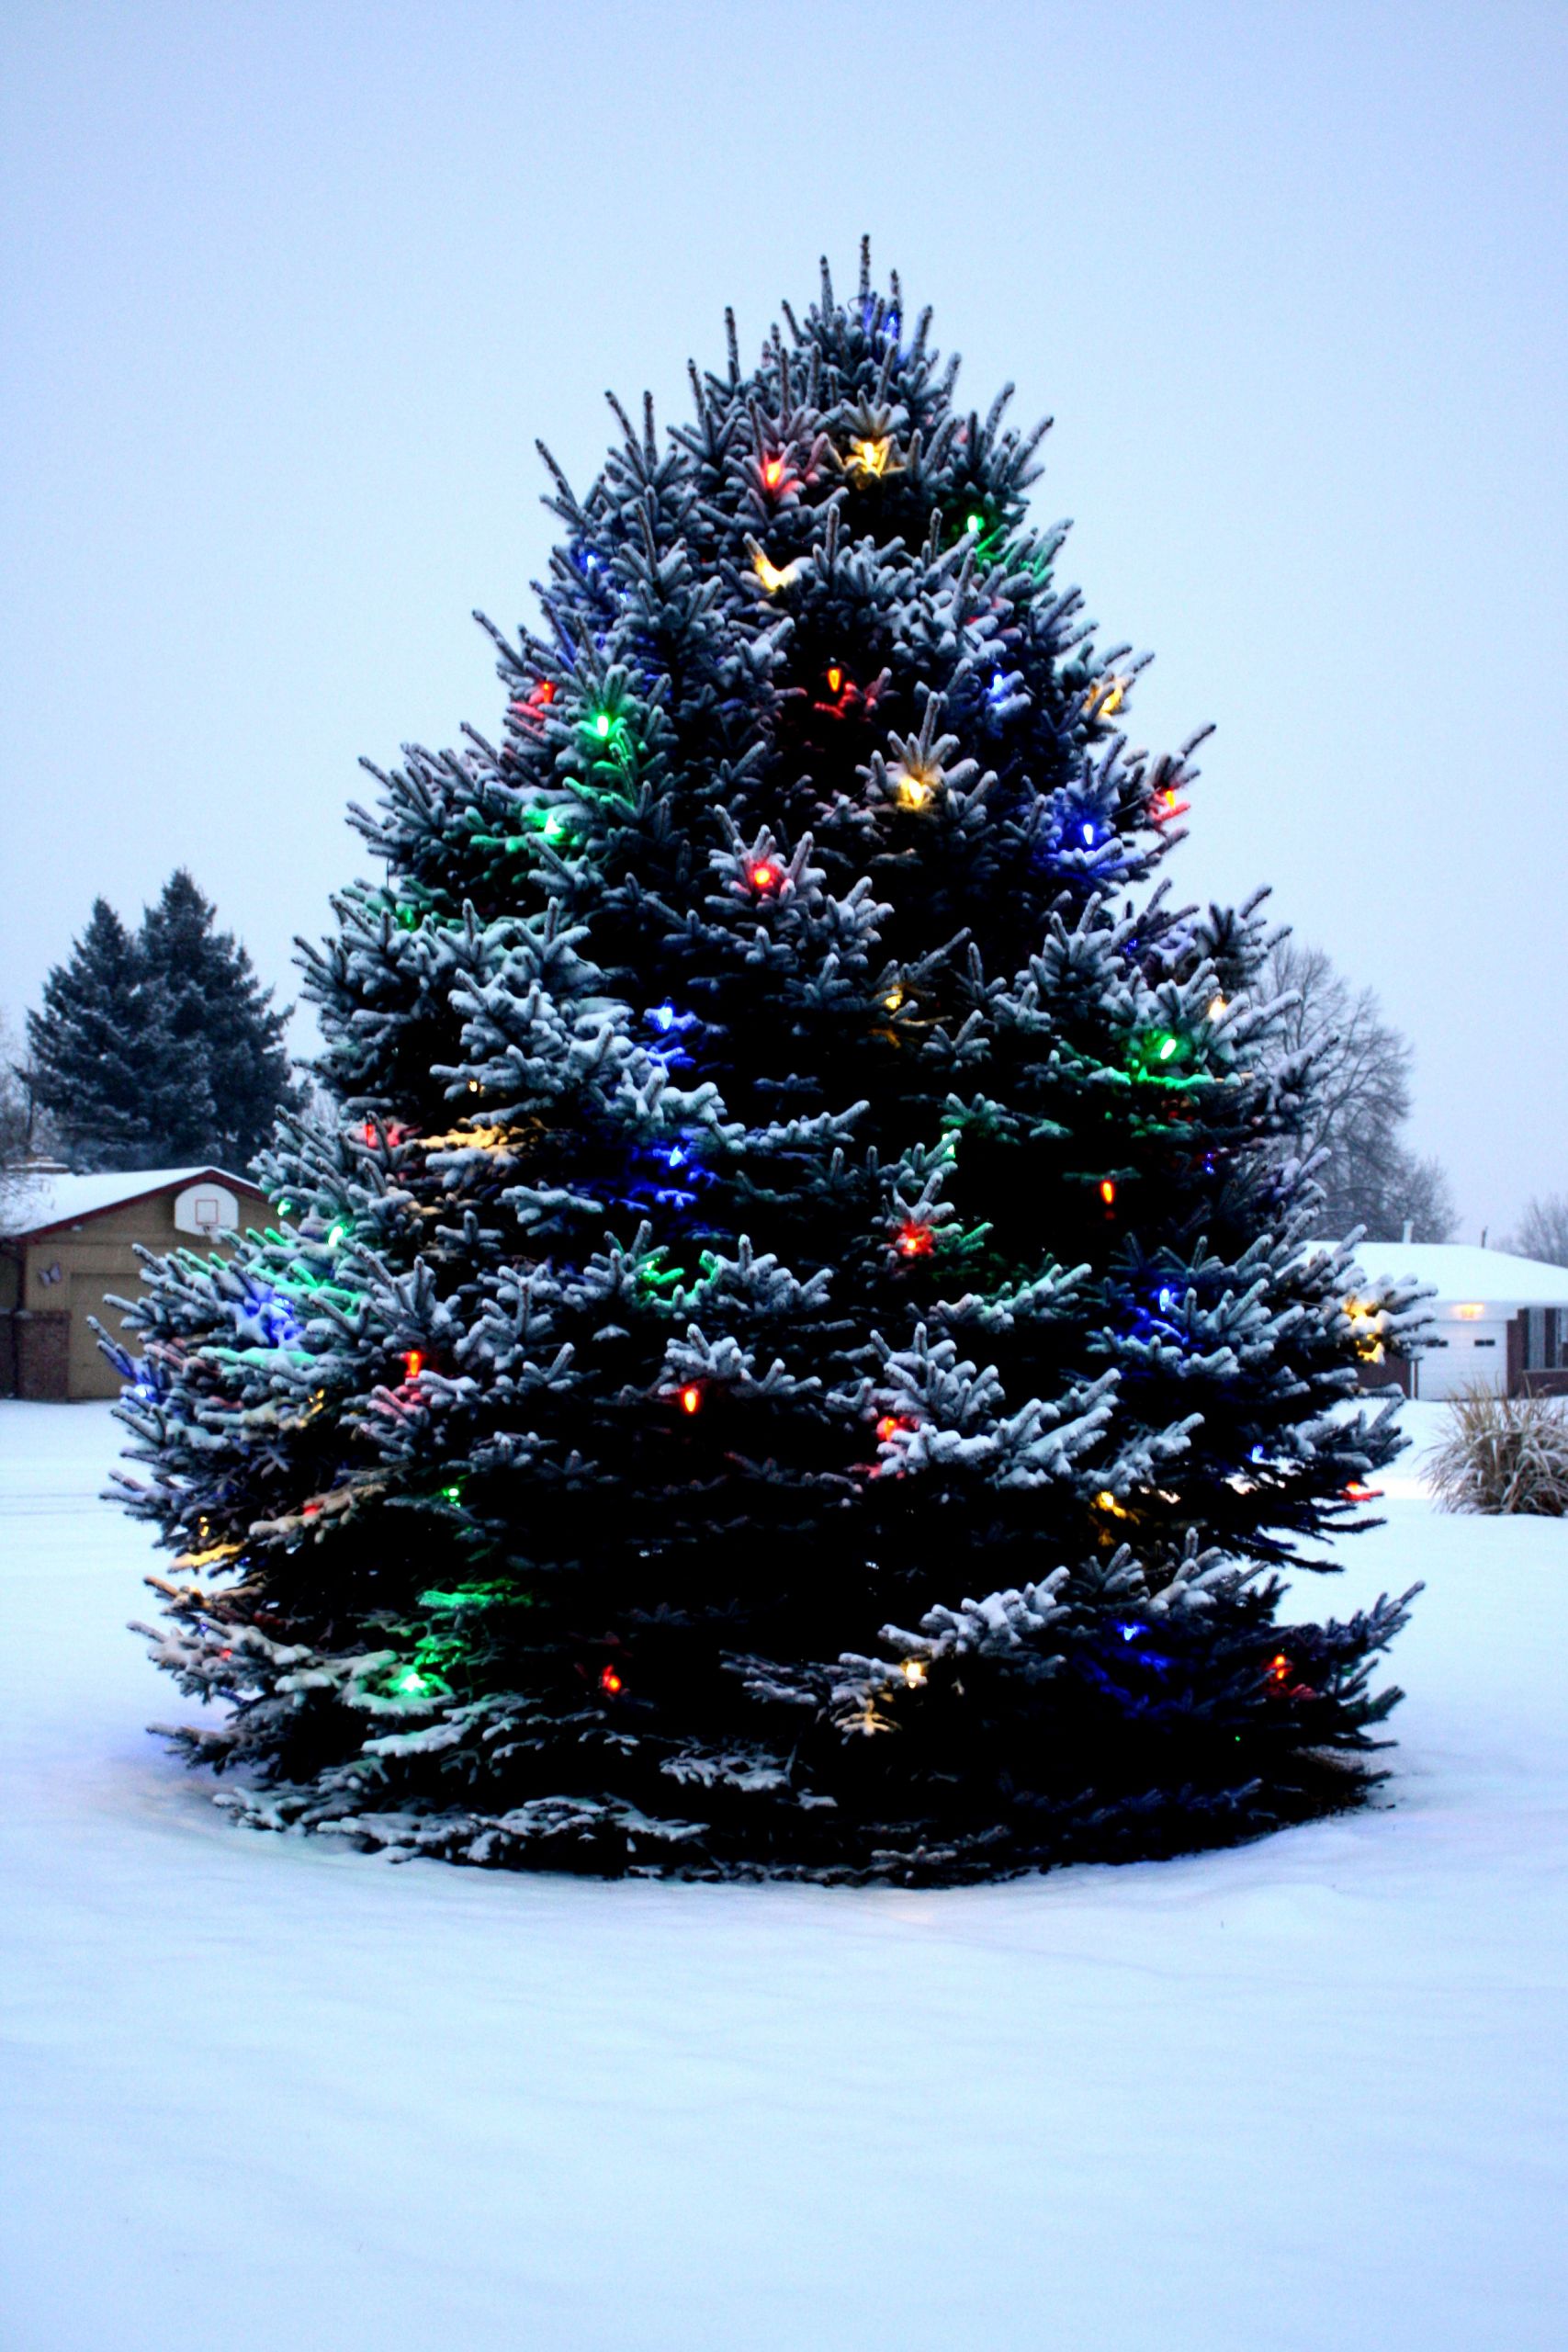 Outdoor Christmas Tree With Lights
 How to install safety Christmas lights on outdoor trees